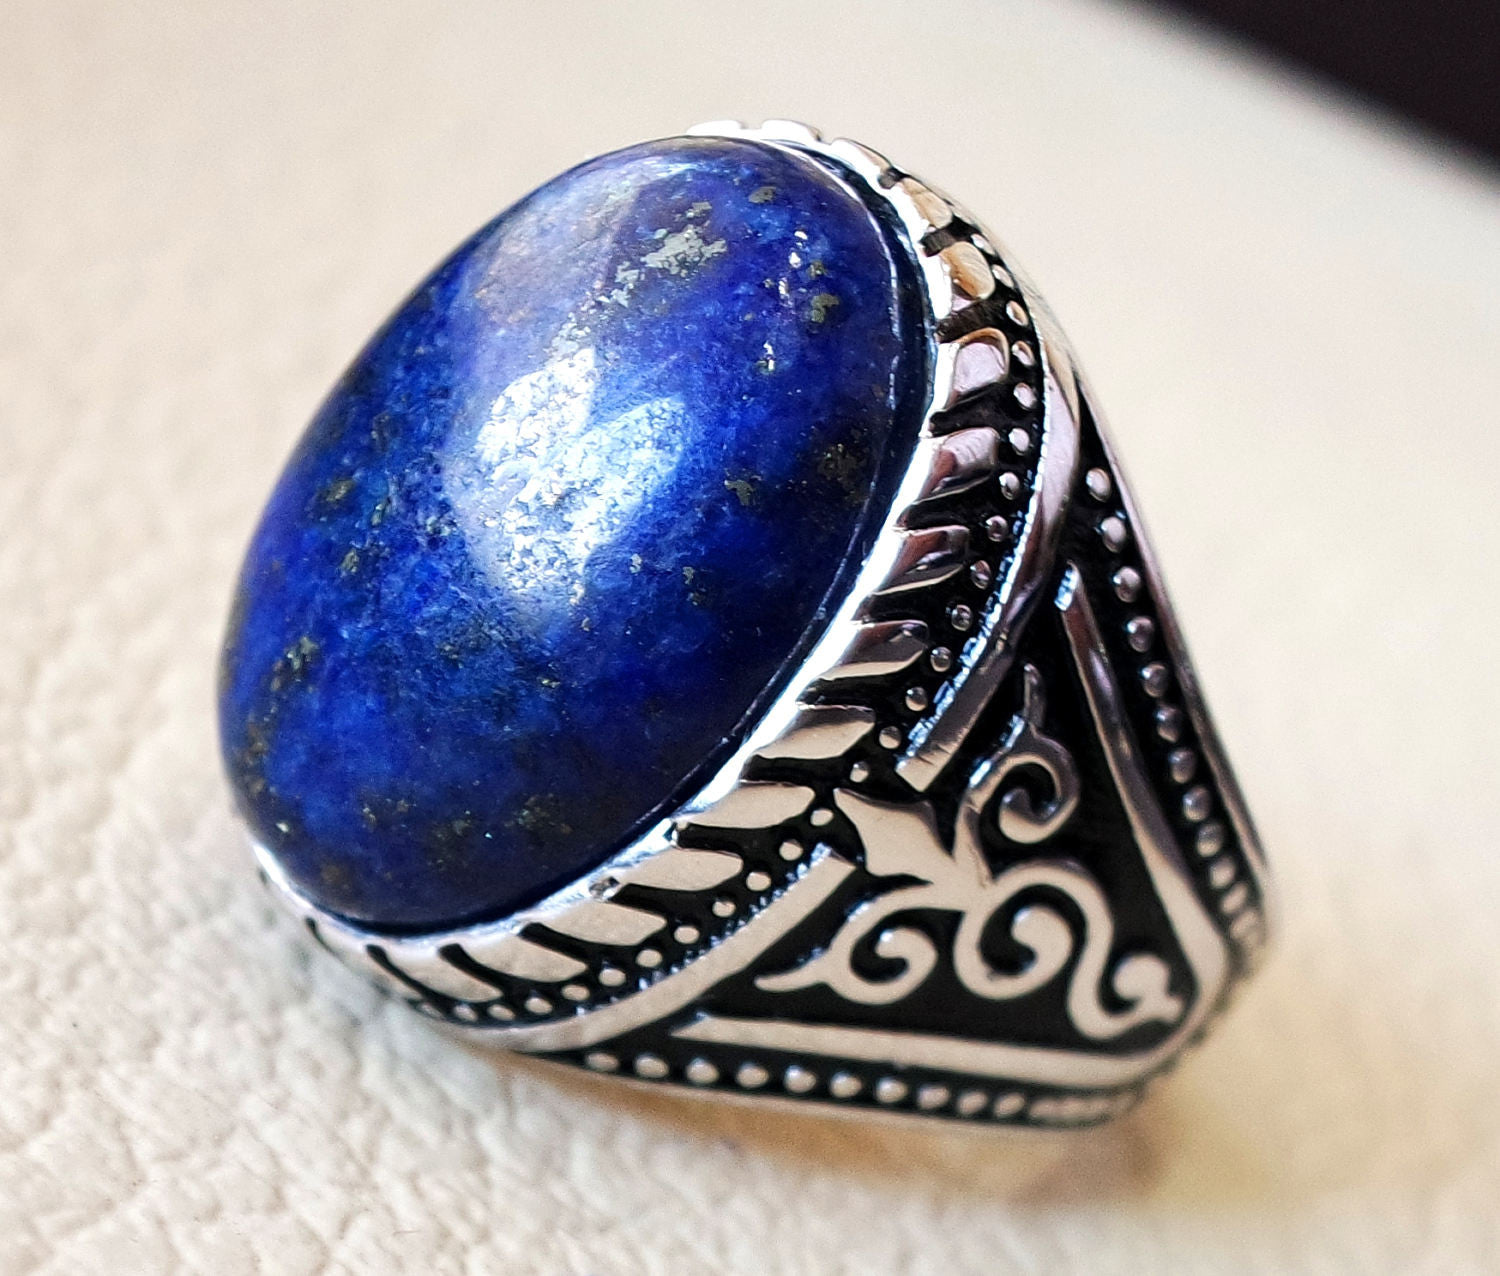 Mens Sapphire Curved Blue Stone Rings For Men Vintage Engraved Oxidized  Silver | eBay